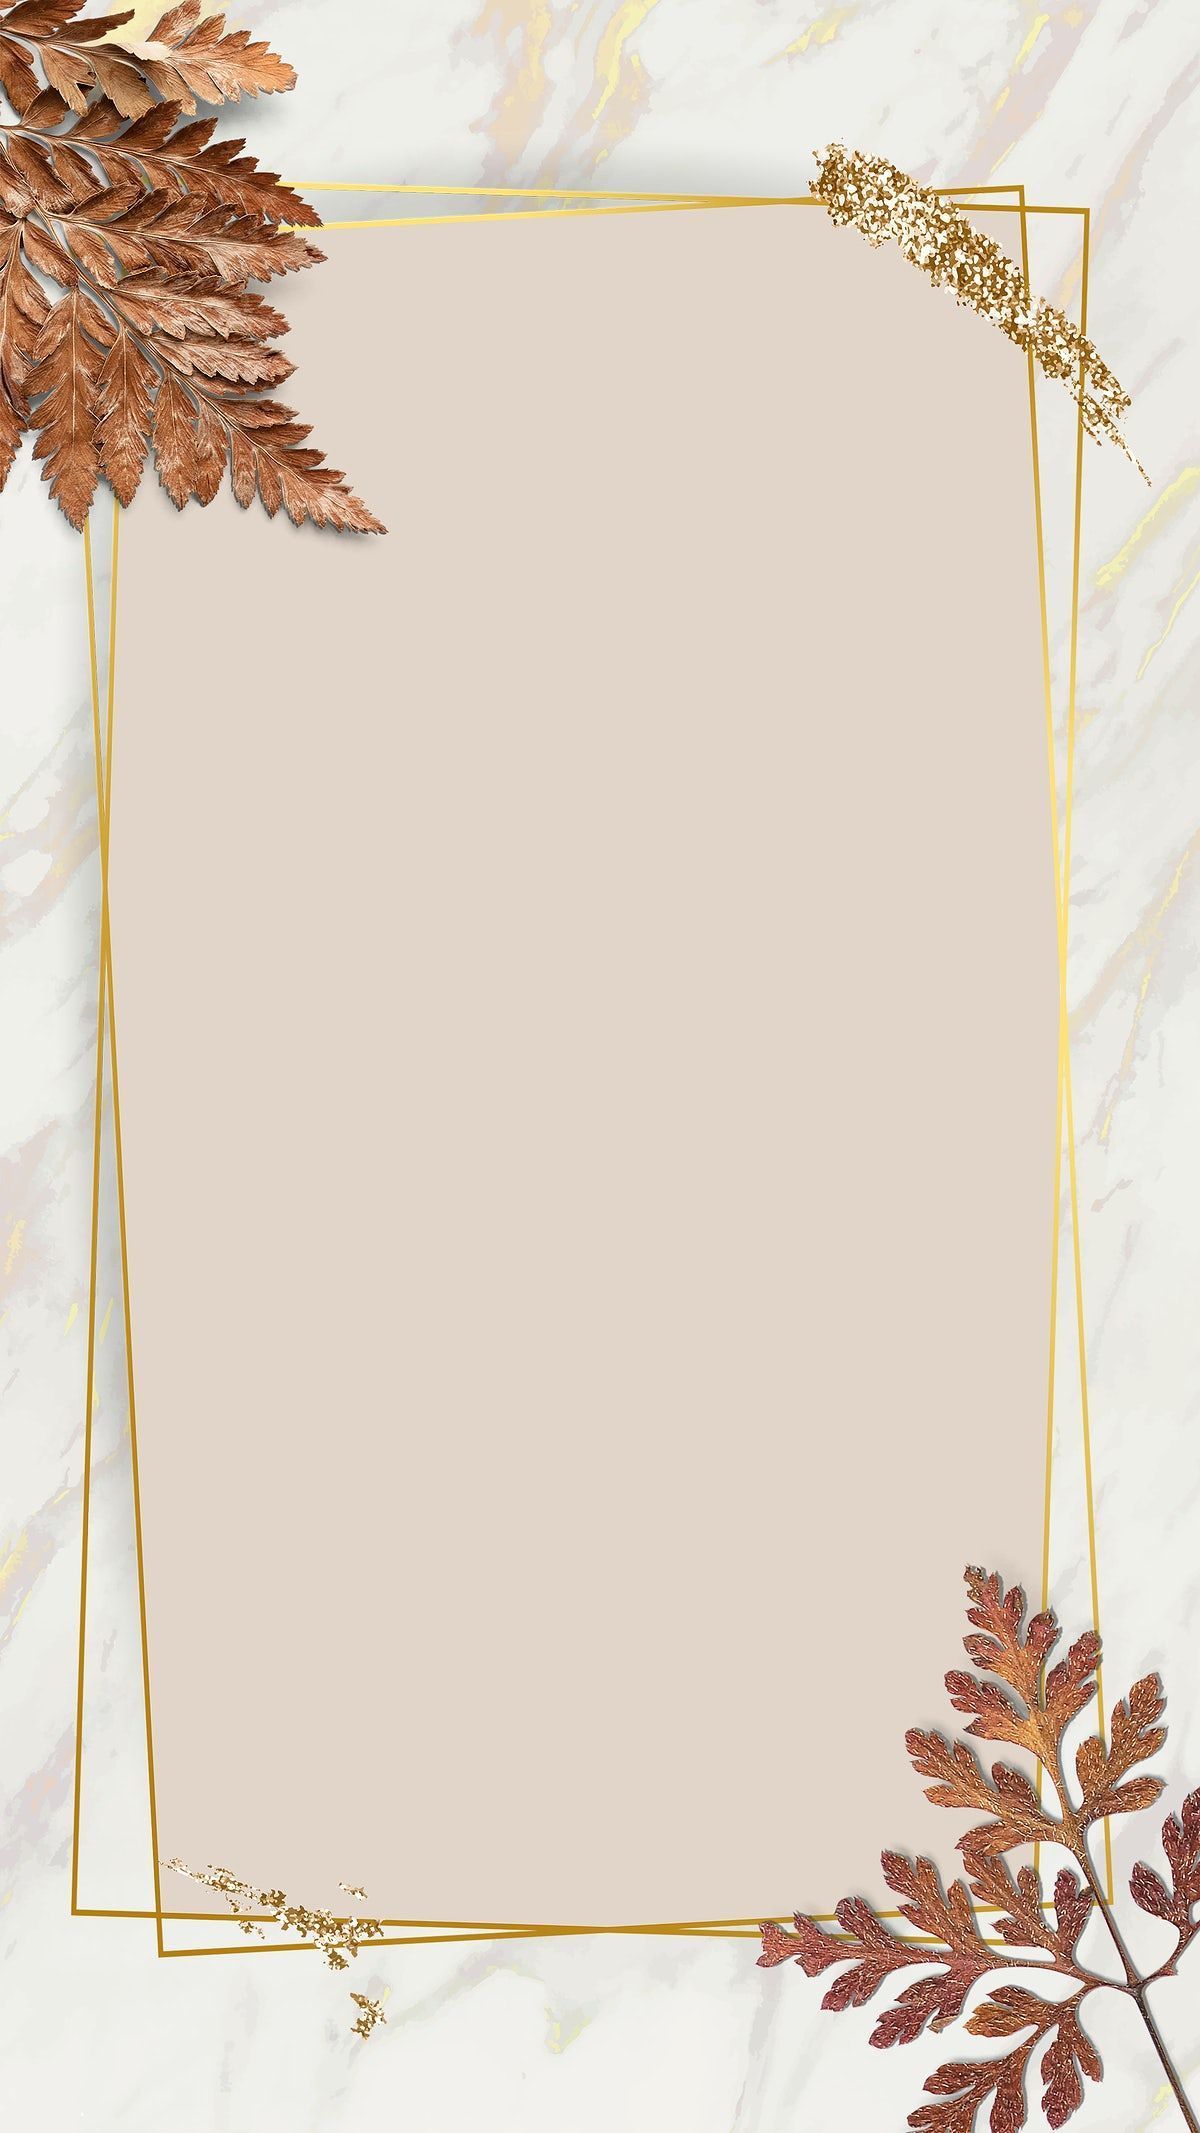 Golden frame with brown leaves on a marble background - Border